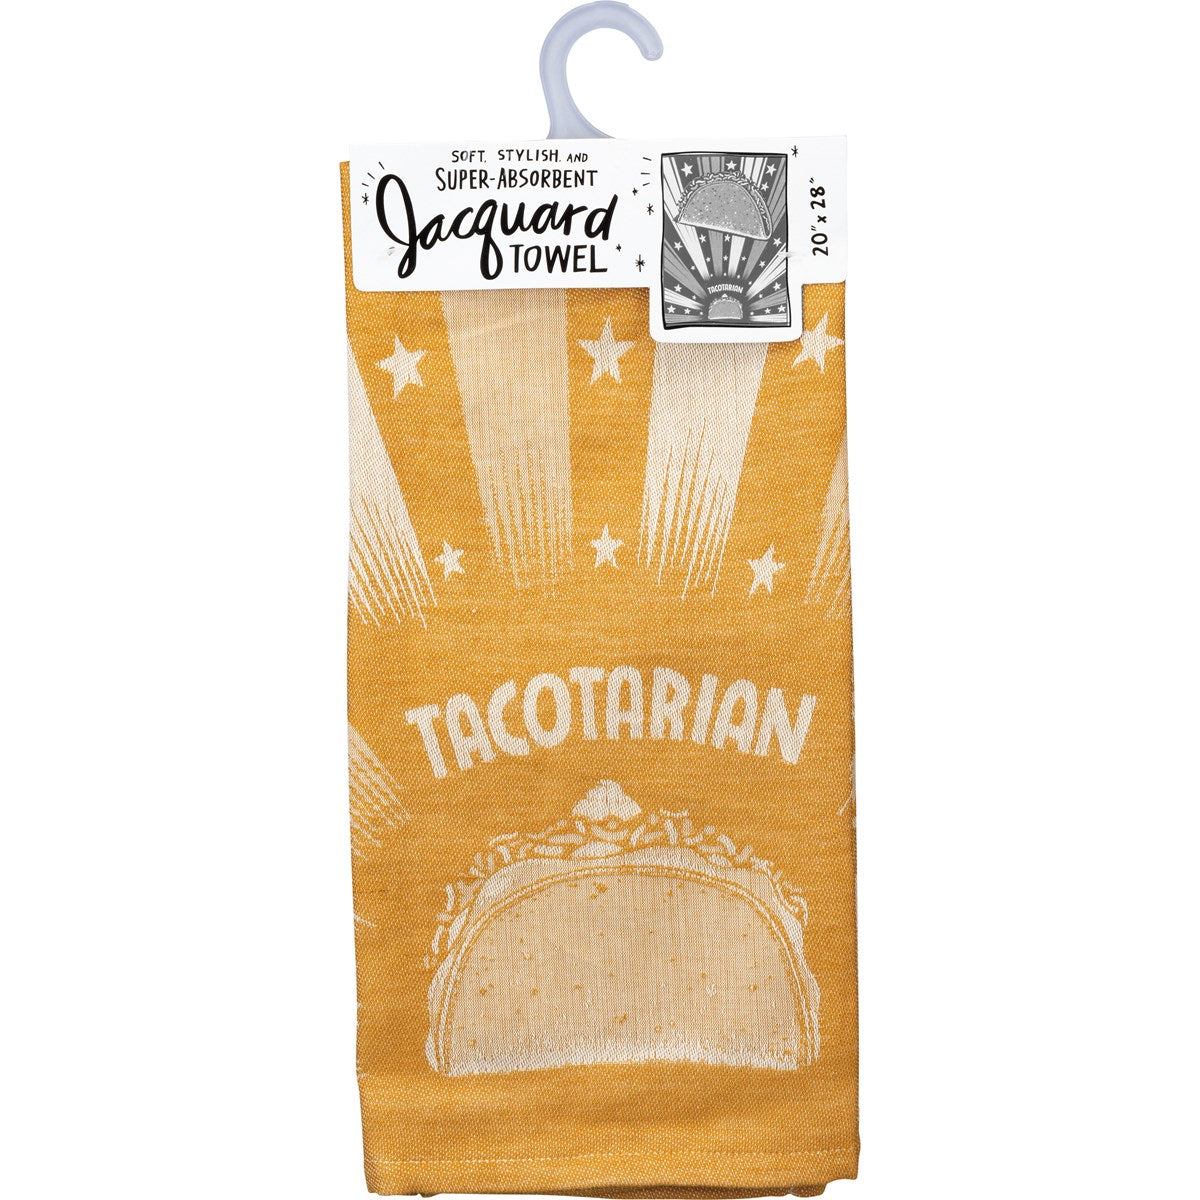 Tacotarian Kitchen Towel For Taco Lovers